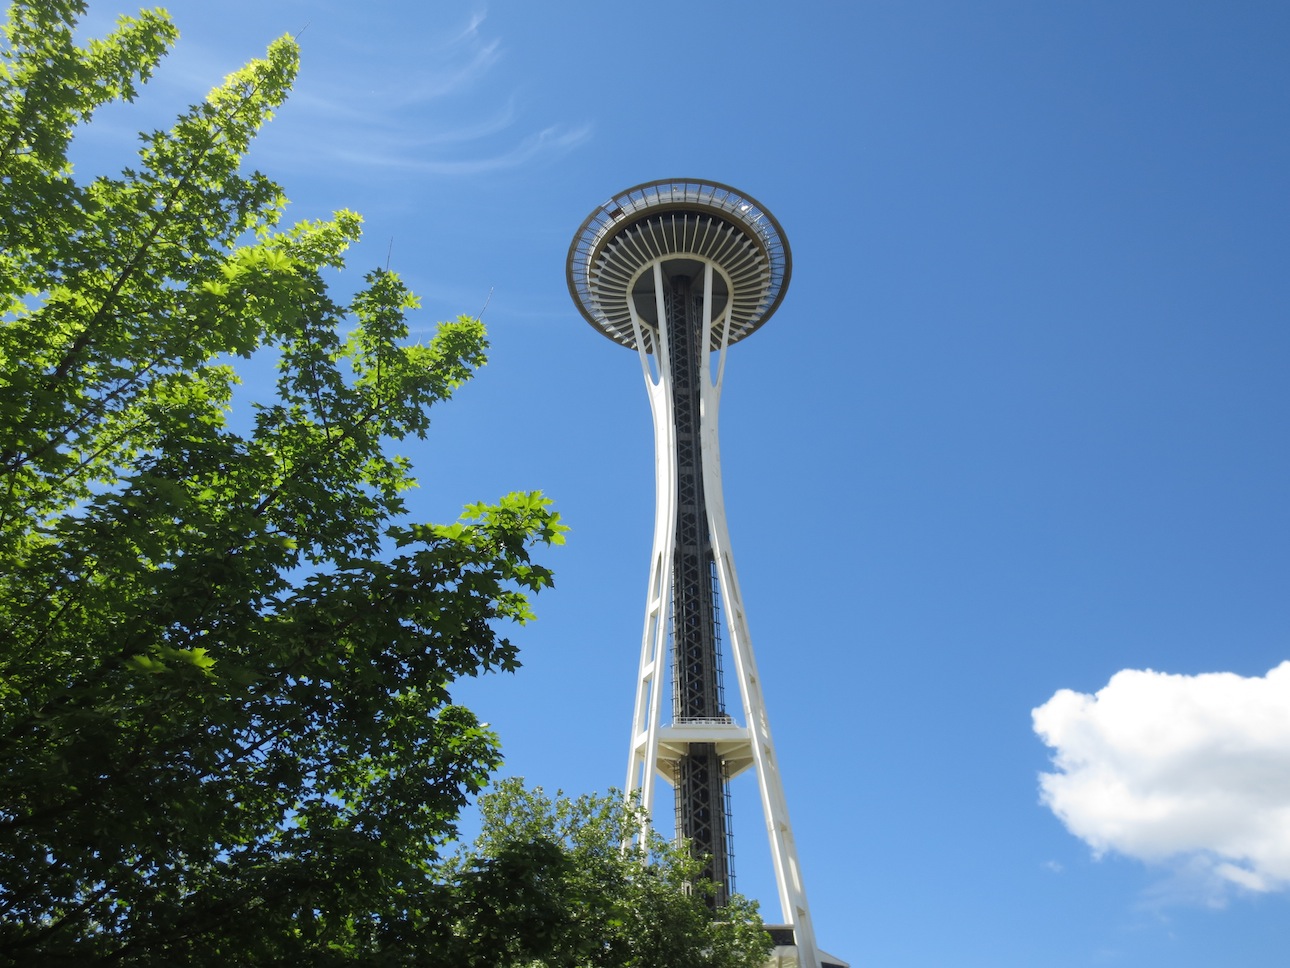 The Seattle Space Needle on a clear day.